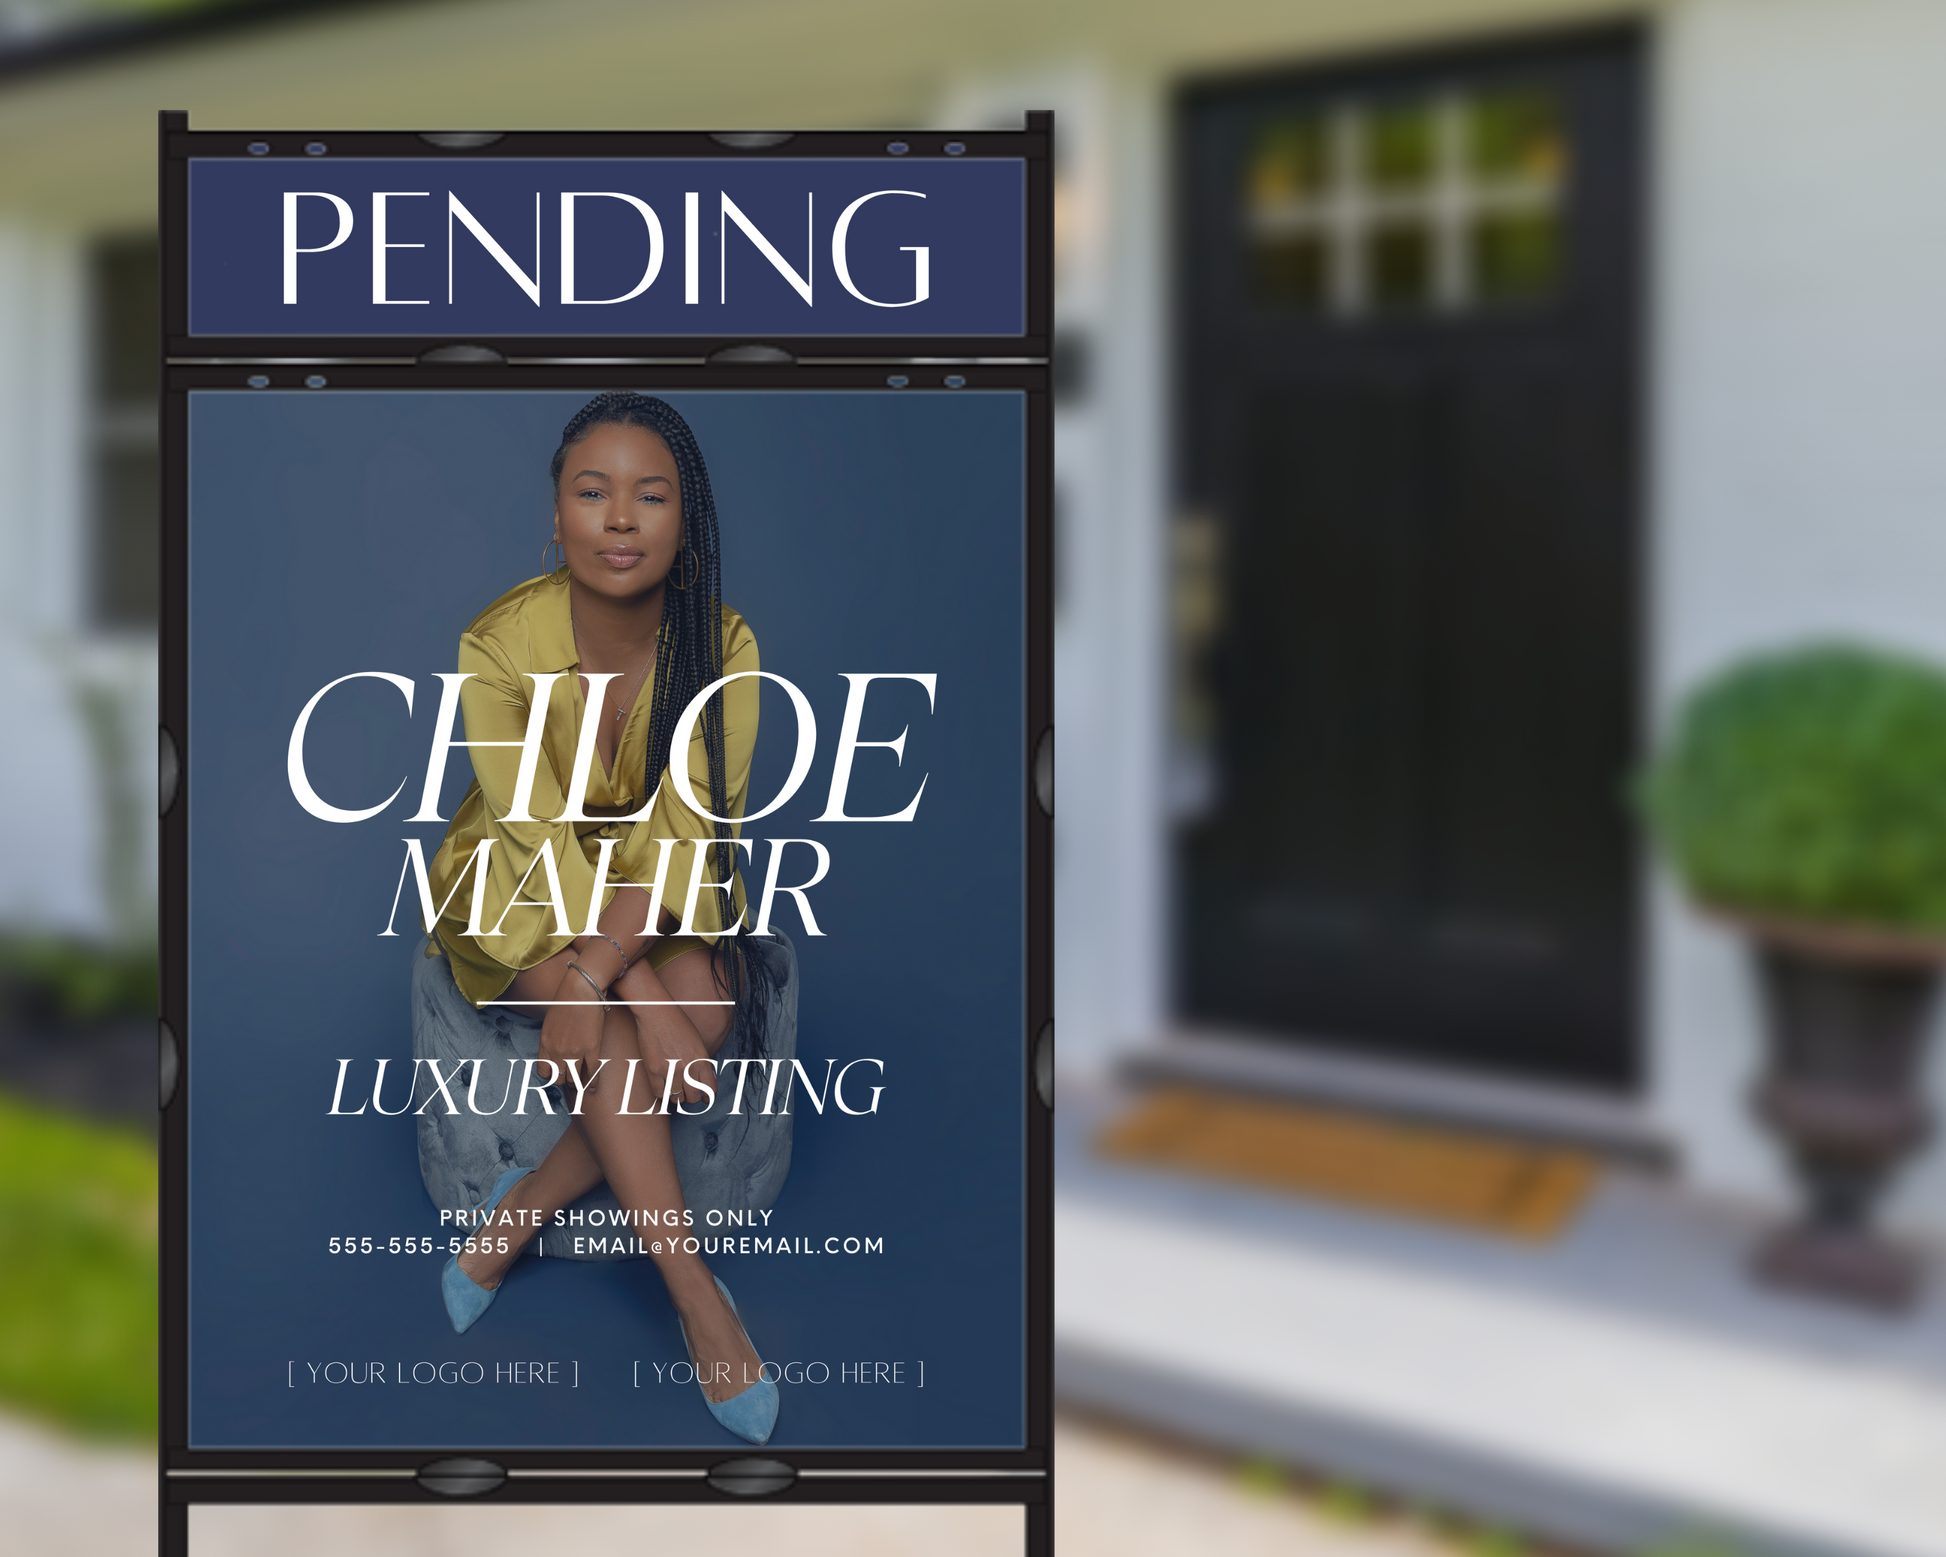 Your clients will be sure to remember you every time they see your professional real estate yard sign. So, what are you waiting for? Start customizing your realtor yard sign template today and watch your business grow!